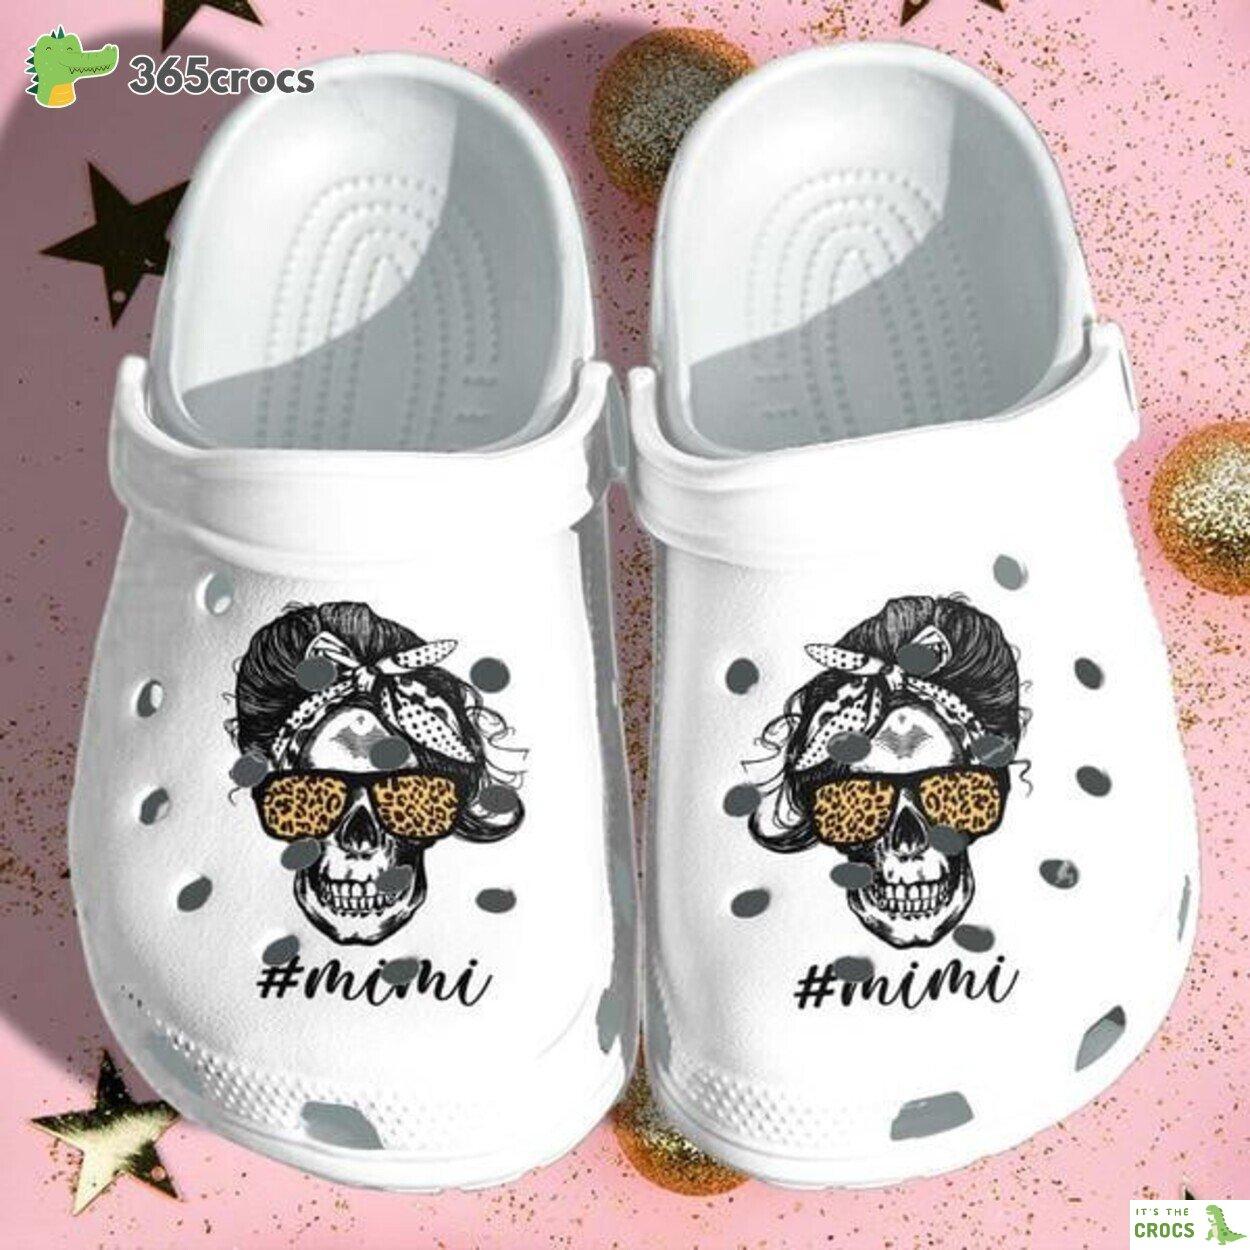 Mimi Tattoo Skull Shoes clog Shoesmothers Day Gifts Nana Tattoo Croc Shoes For Grandma